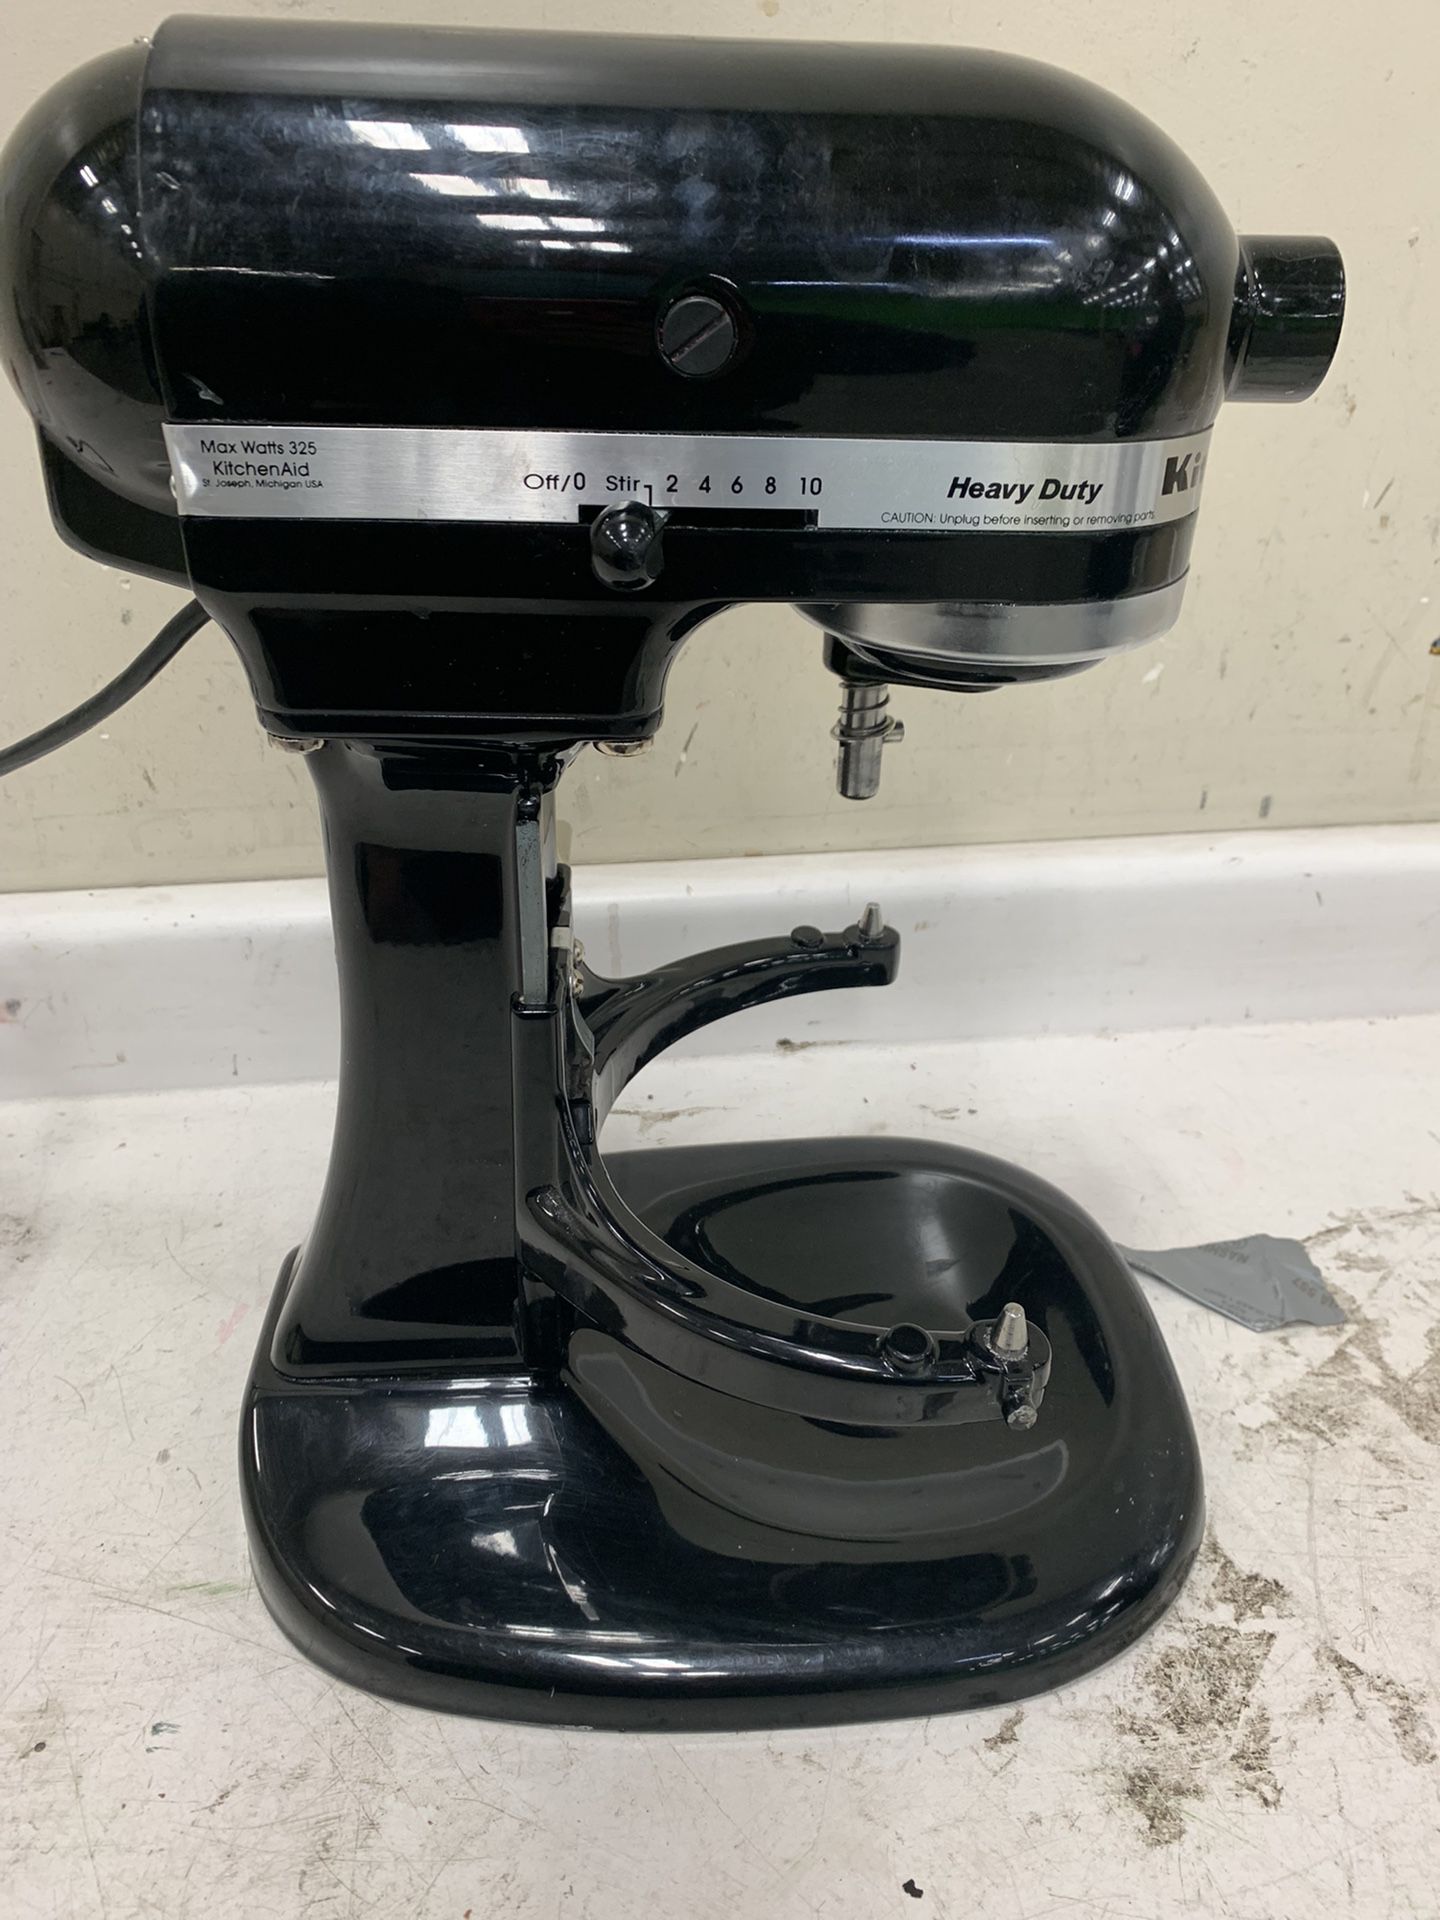 KitchenAid 5.5 Quart Bowl-Lift Stand Mixer - KSM55 - Matte Black for Sale  in North Wales, PA - OfferUp